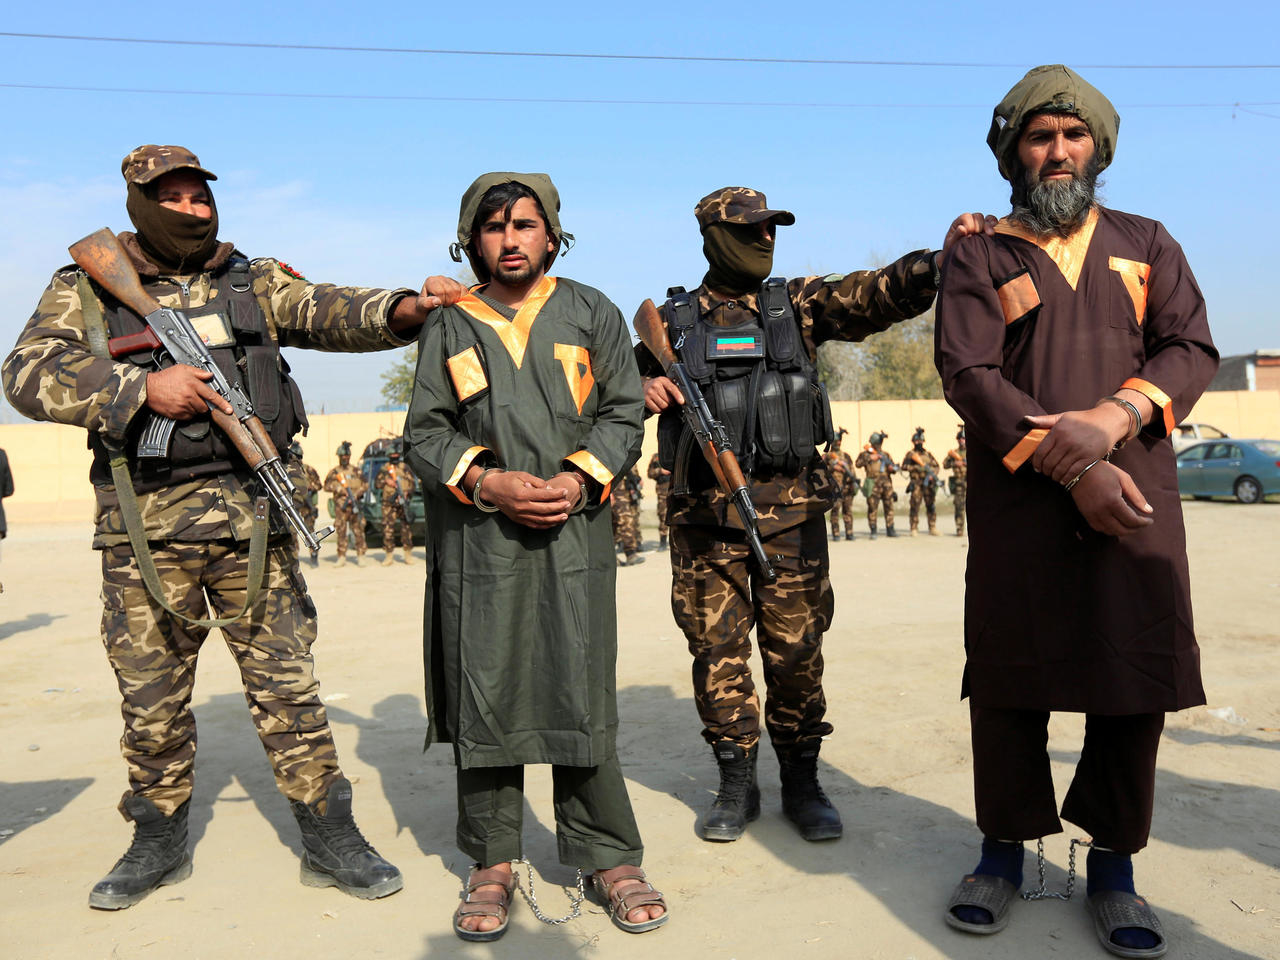 26 Taliban fighters killed in northern Afghanistan